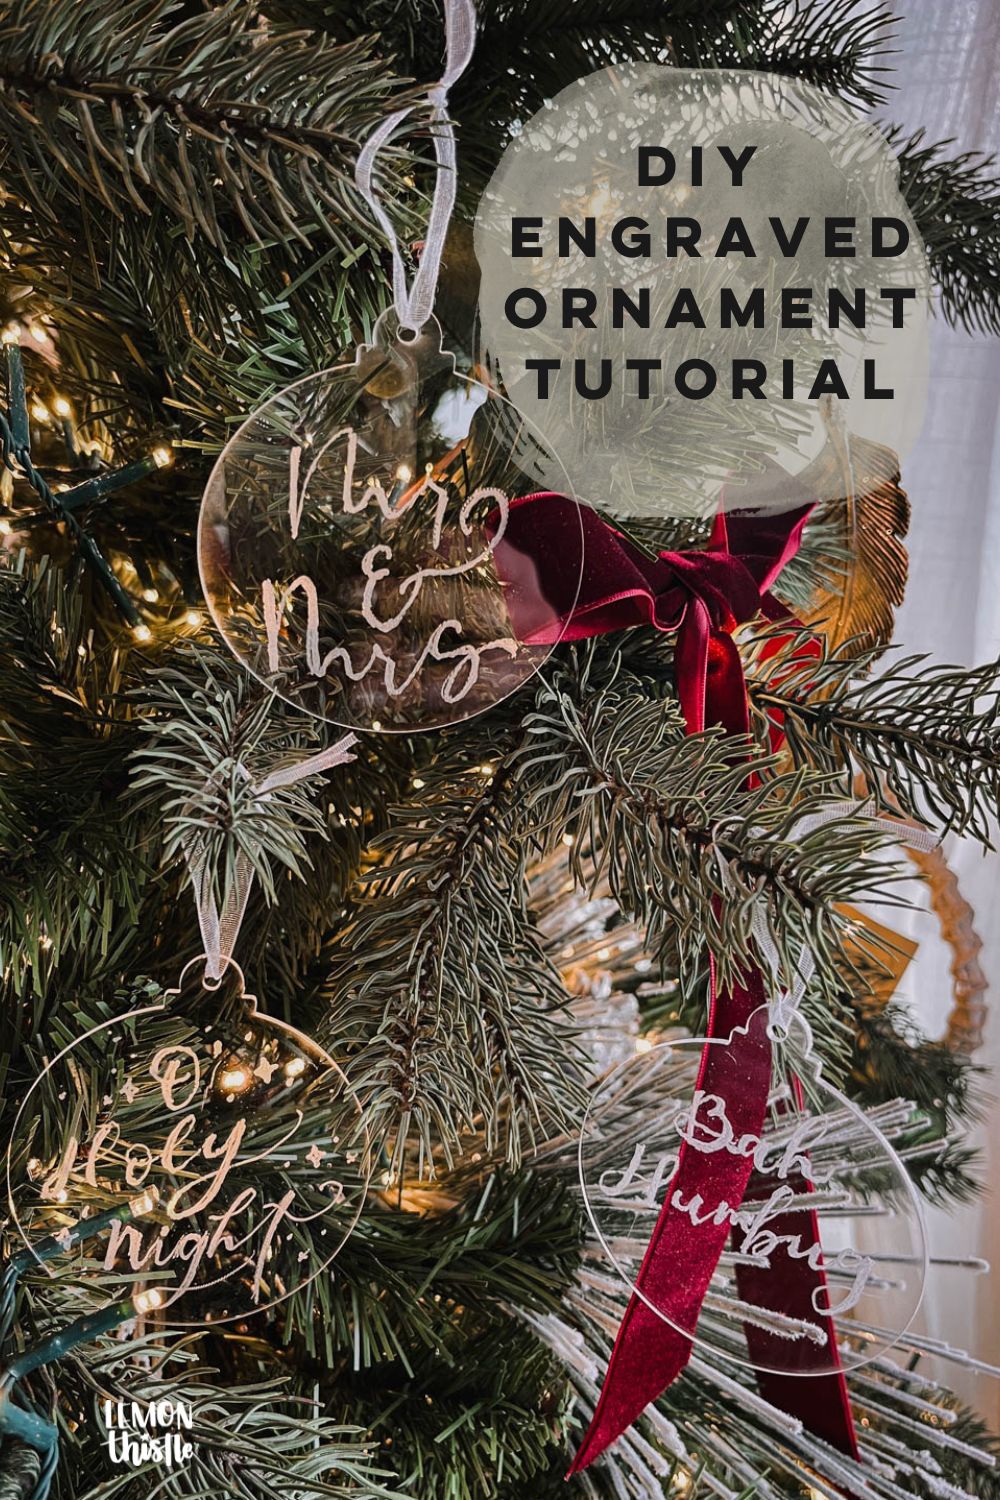 DIY Engraved Ornaments- image with text over